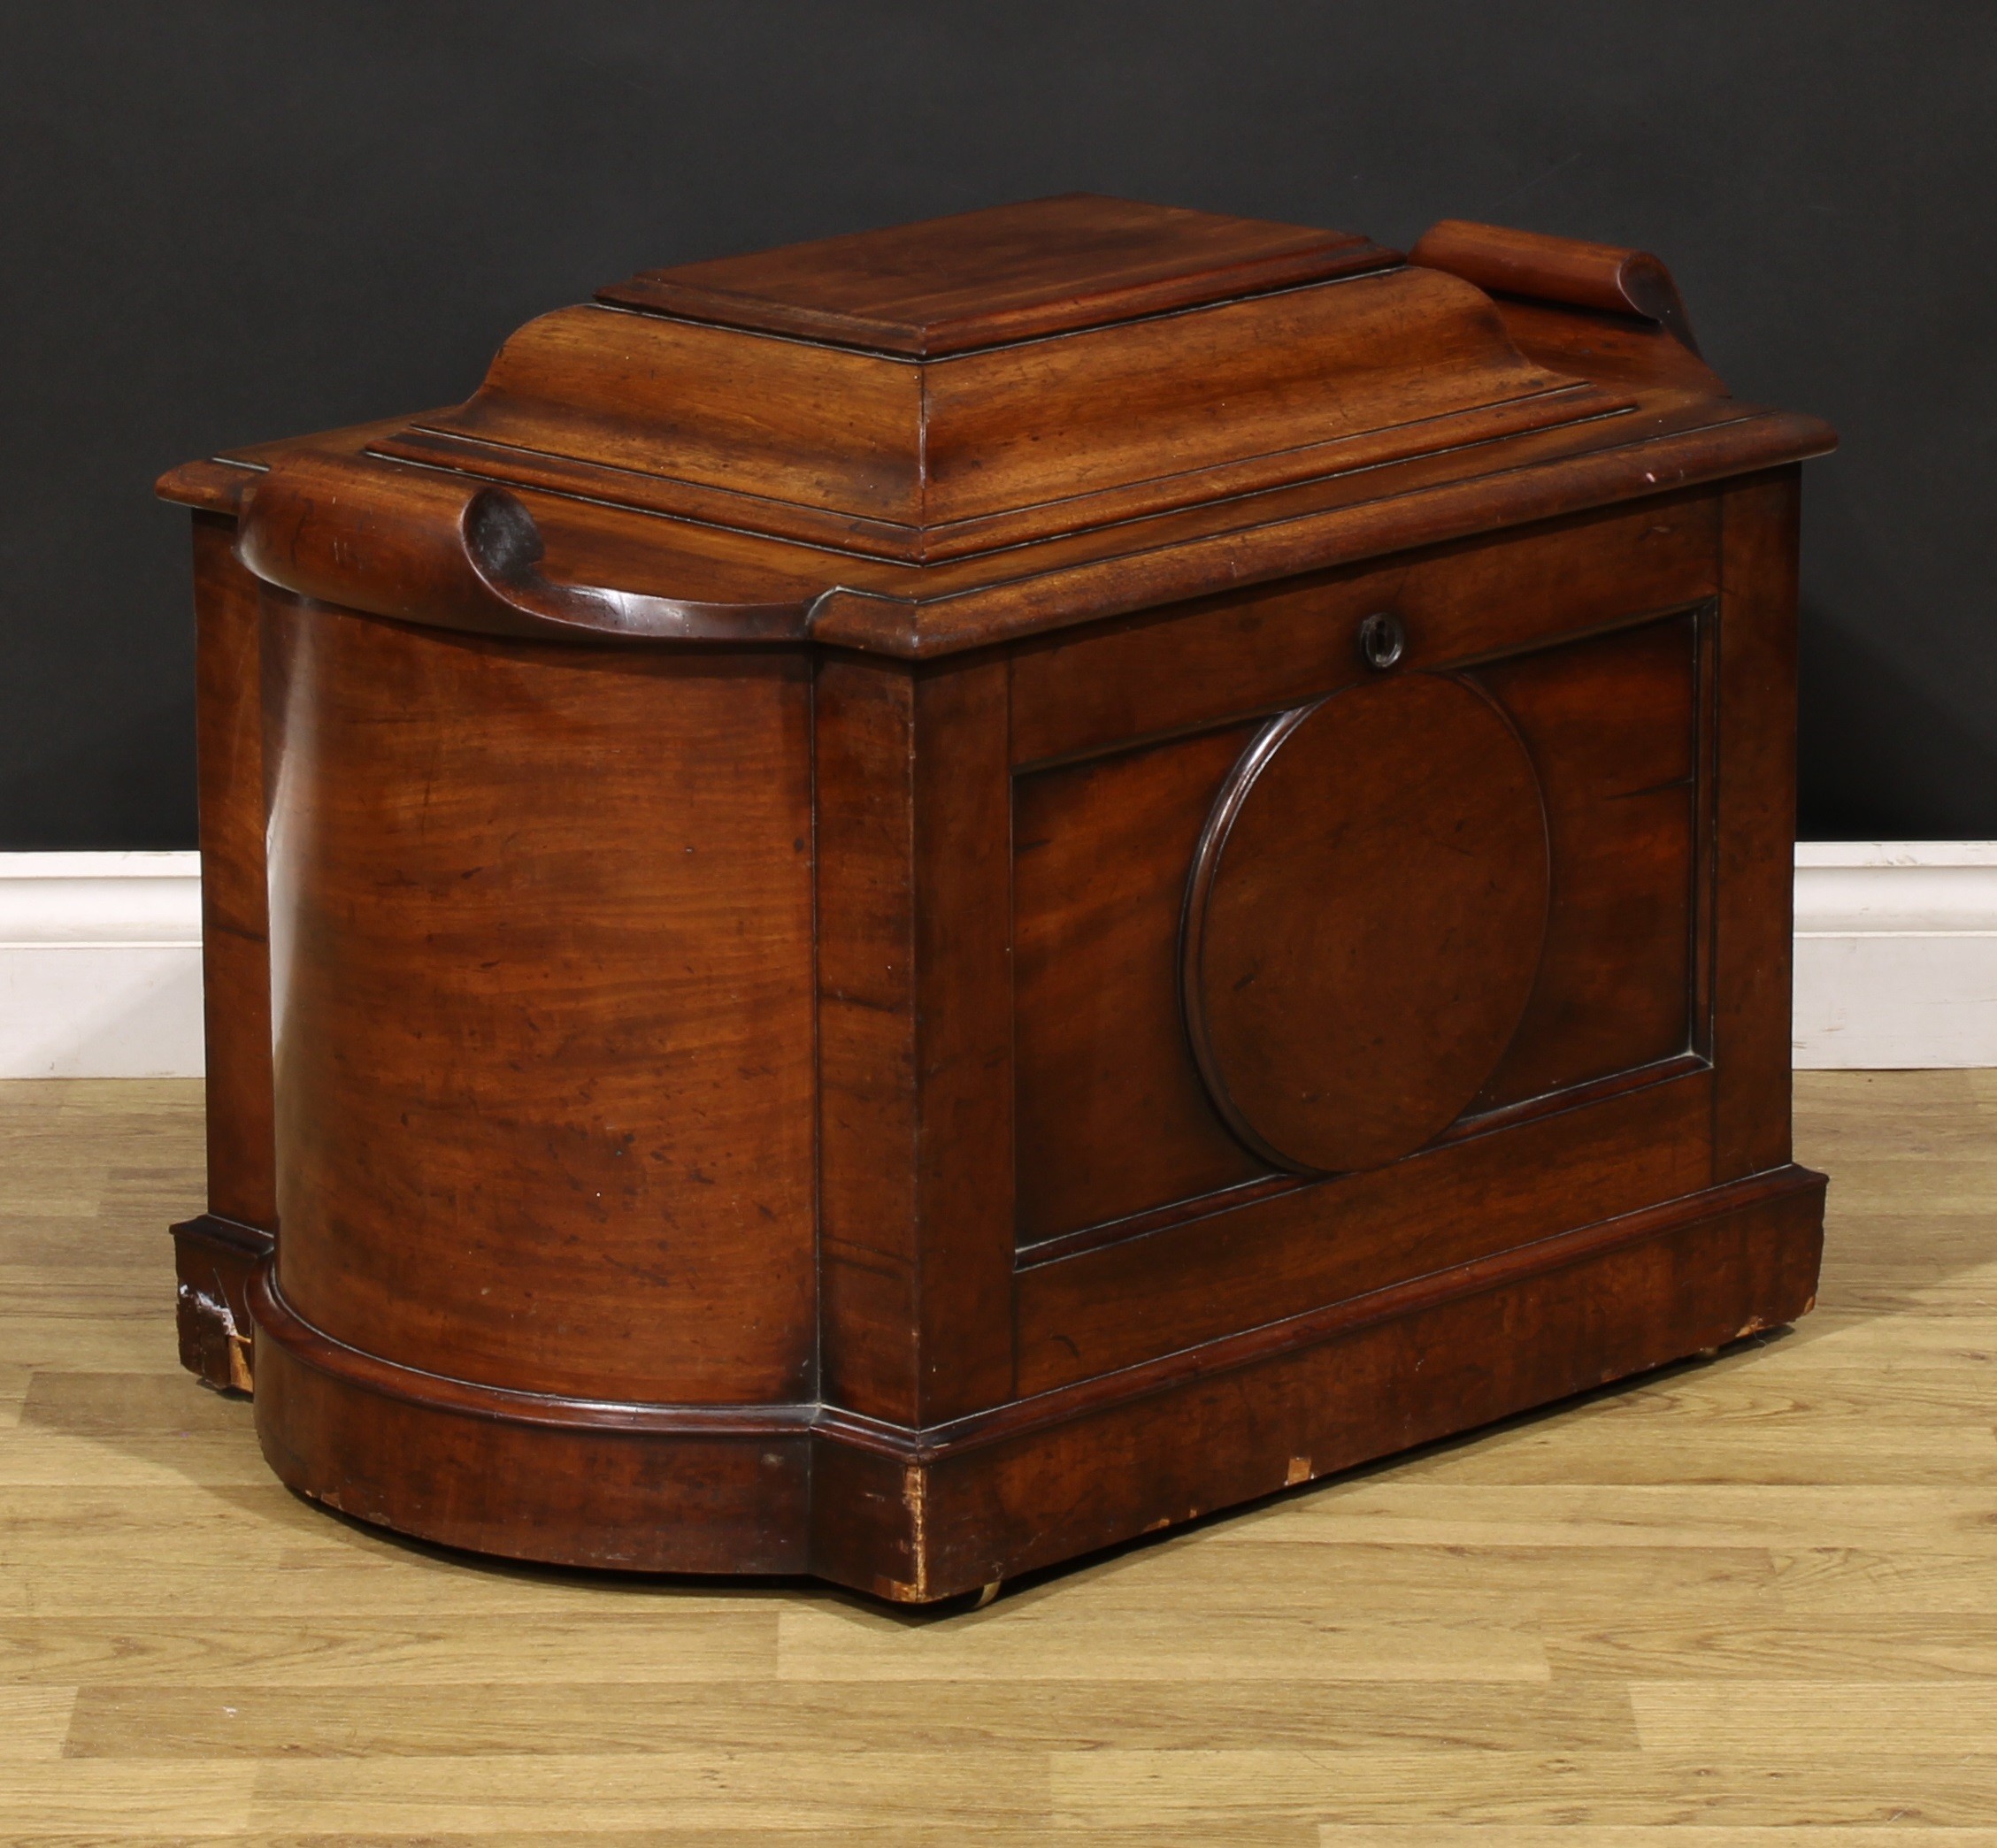 A Post-Regency mahogany cellarette, hinged cover enclosing a compartmented zinc-lined interior, - Image 2 of 5